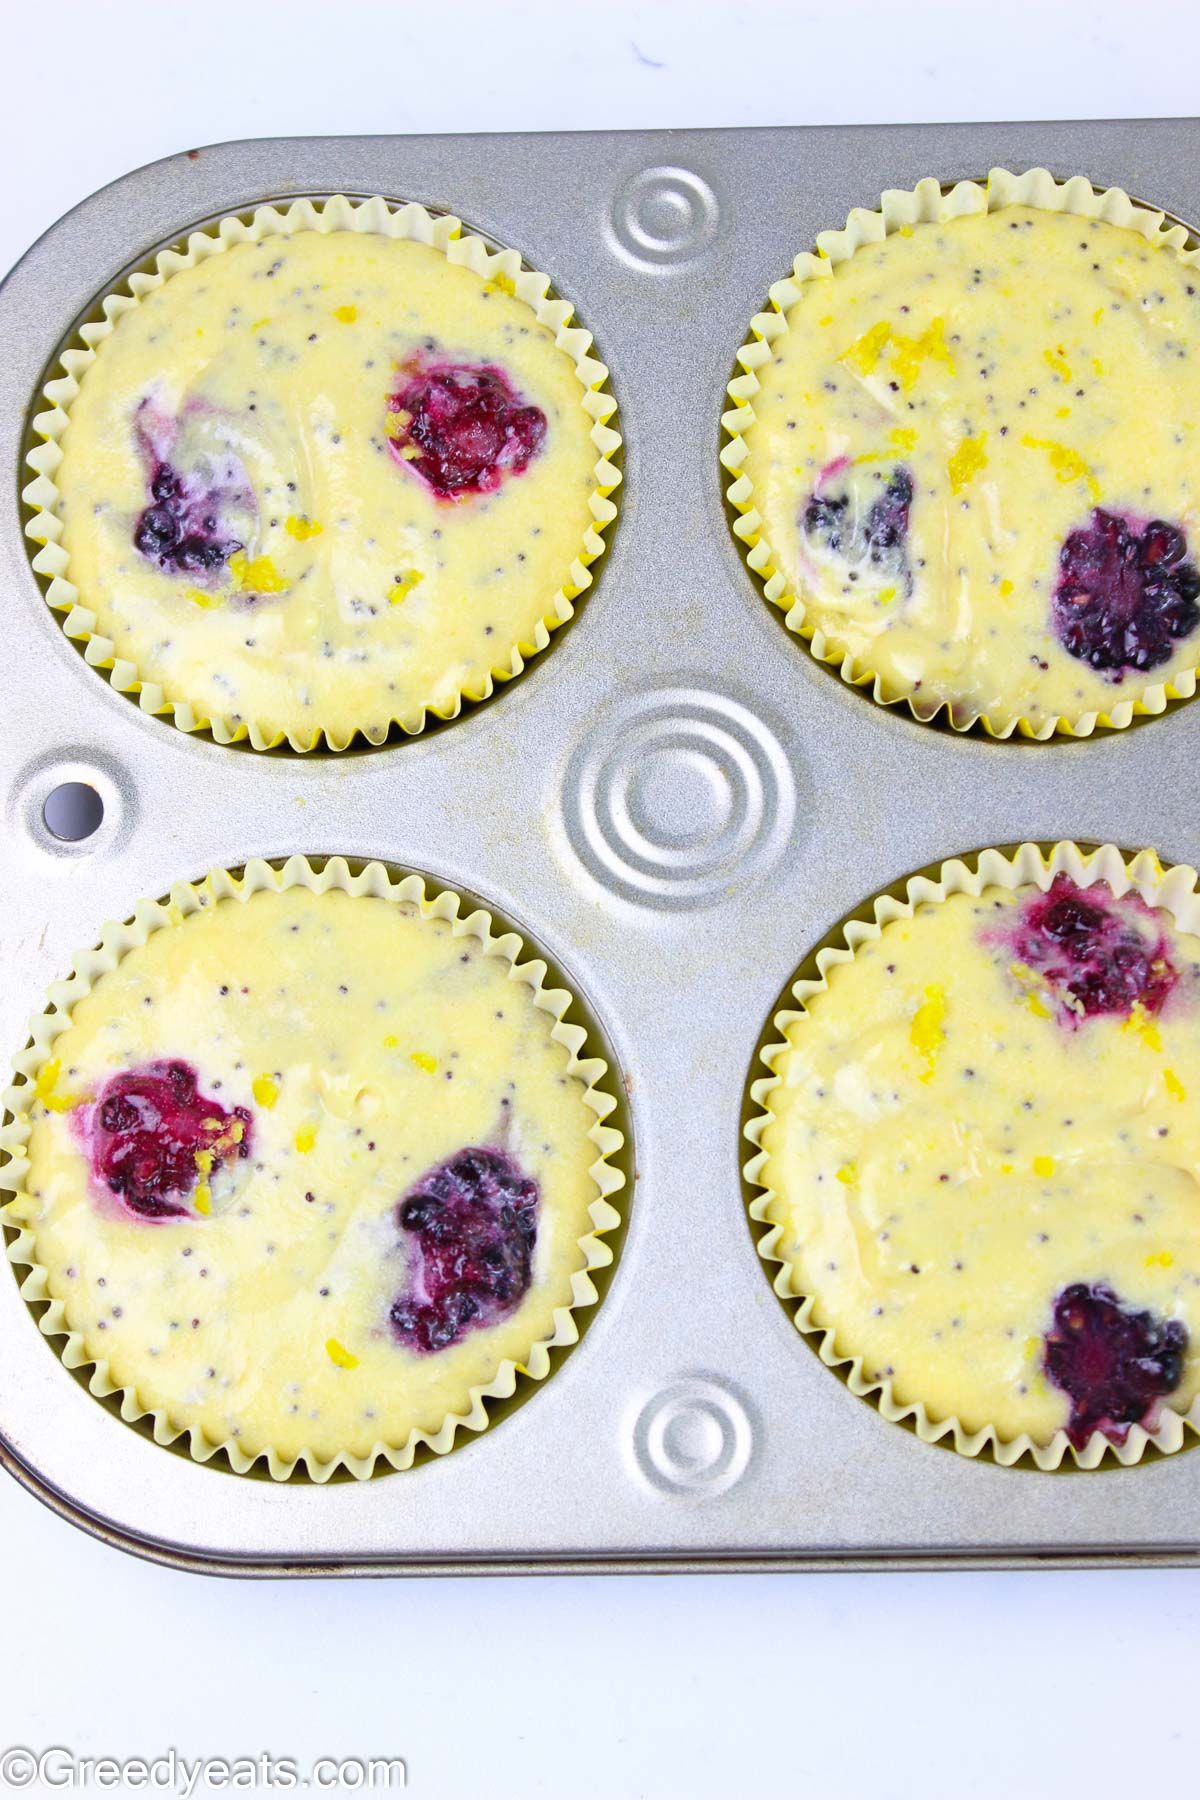 Lemon muffins batter poured in muffin tray ready to be baked.